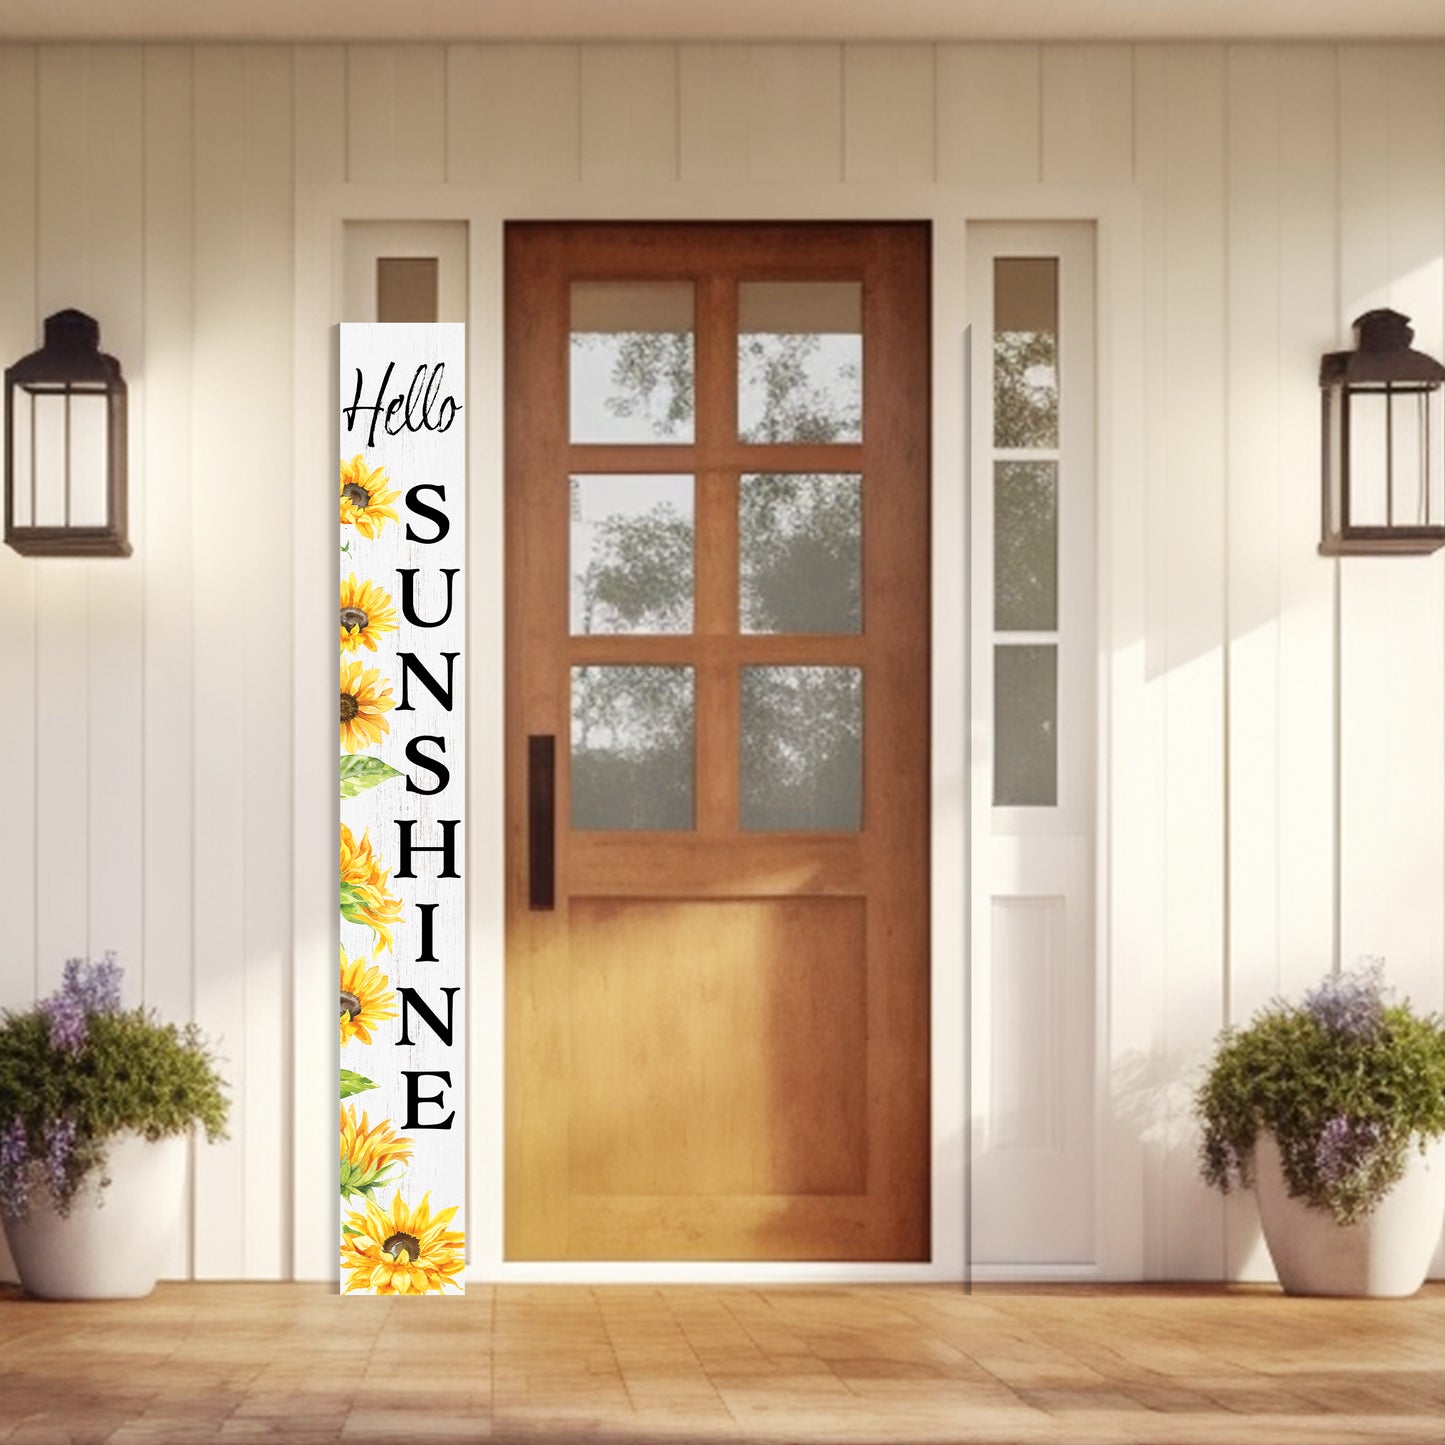 72In Sunflower Hello Sunshine Porch Sign, Charming White Welcome Decor For Front Door, Rustic Vertical Garden Art, Seasonal Home Decoration